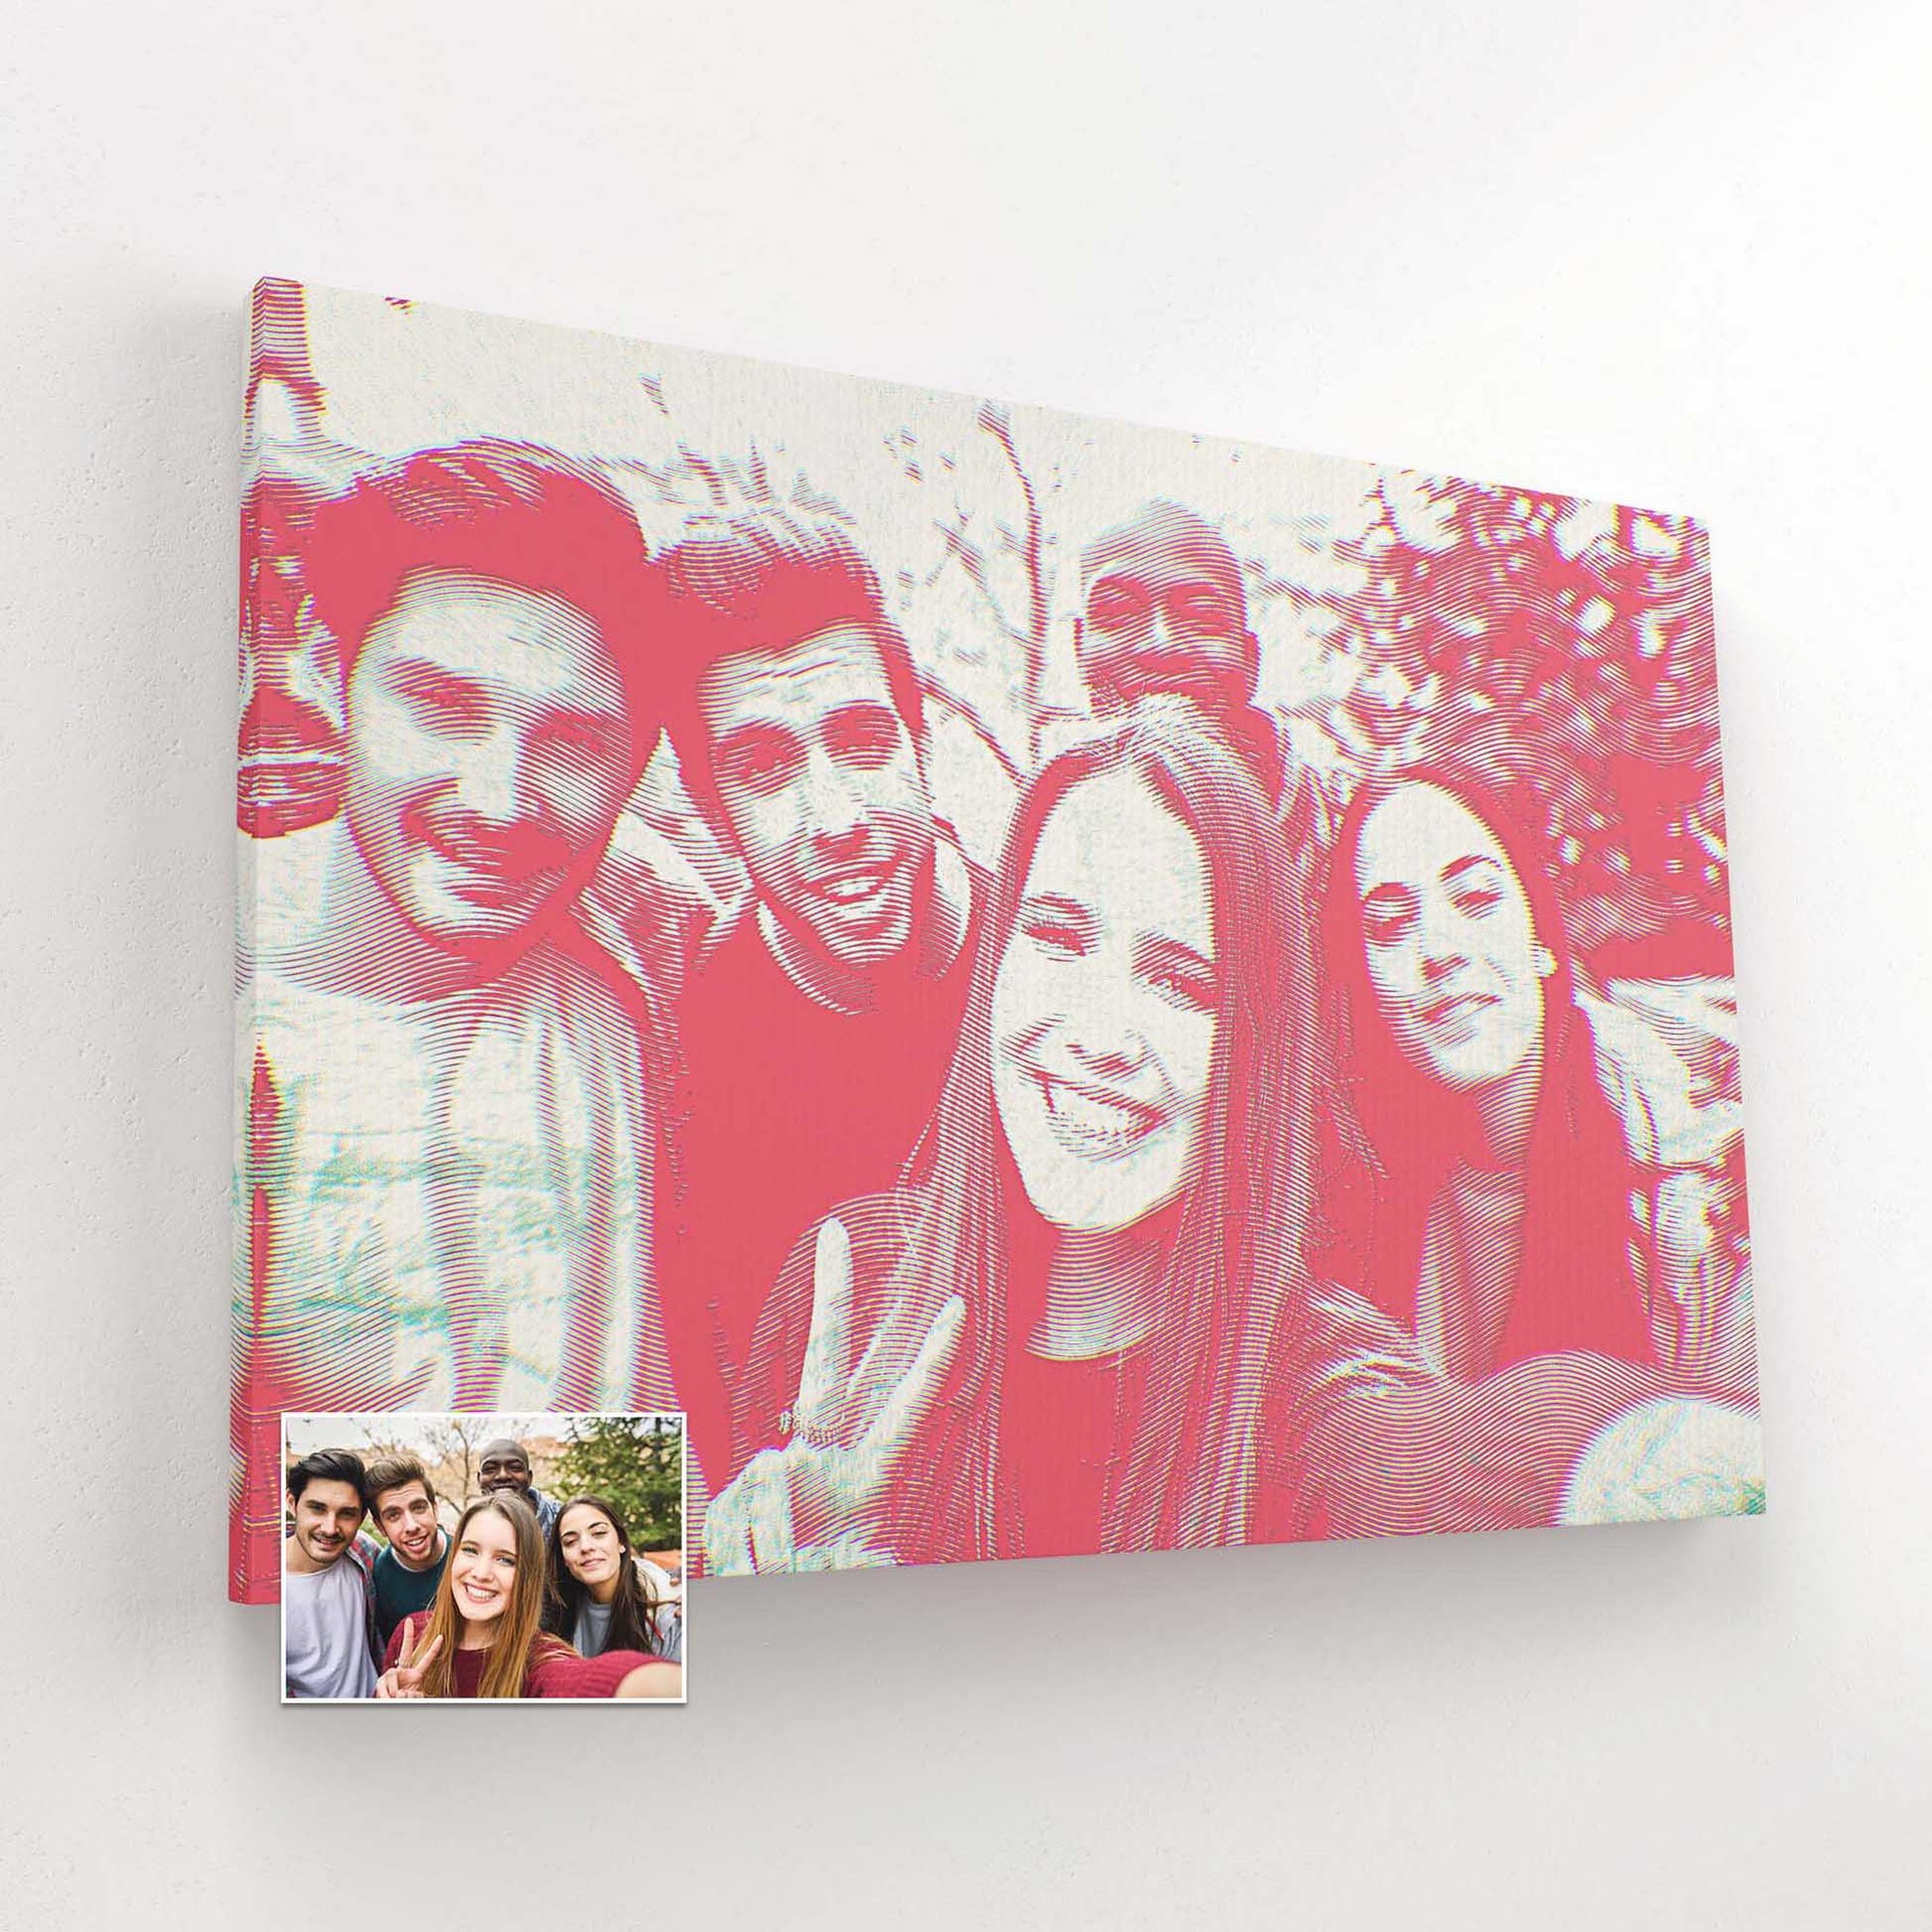 Cherish your precious memories with a Personalised Pink Engraving Canvas. This custom artwork is created by printing your photo on a high-quality handmade canvas, resulting in a stunning and unique piece